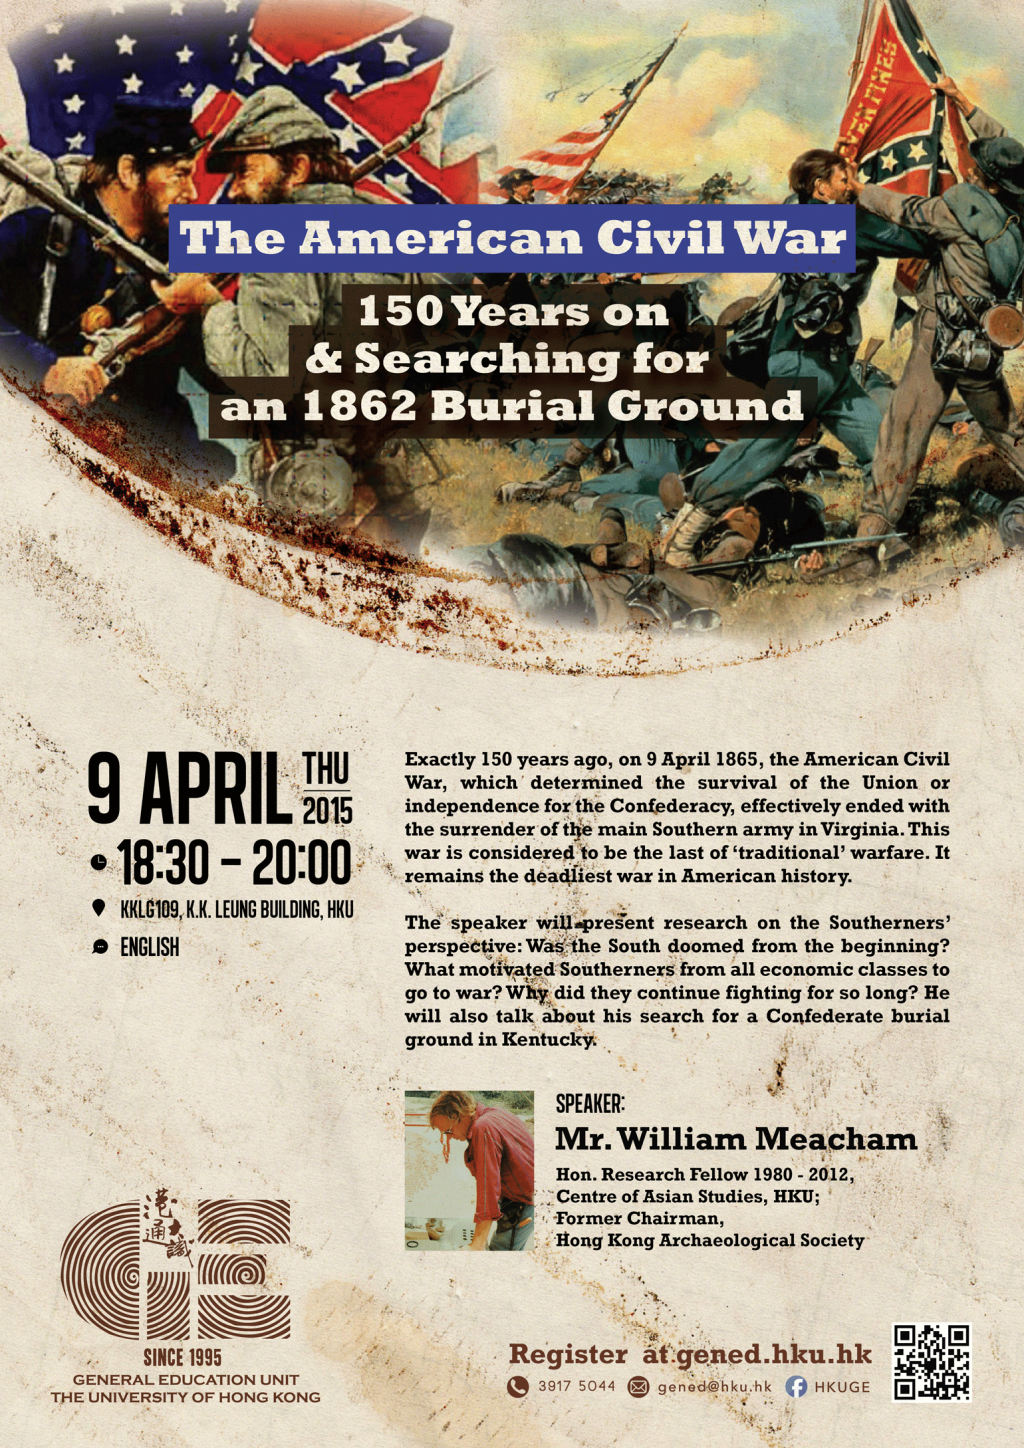 The American Civil War: 150 Years on and Searching for an 1862 Burial Ground